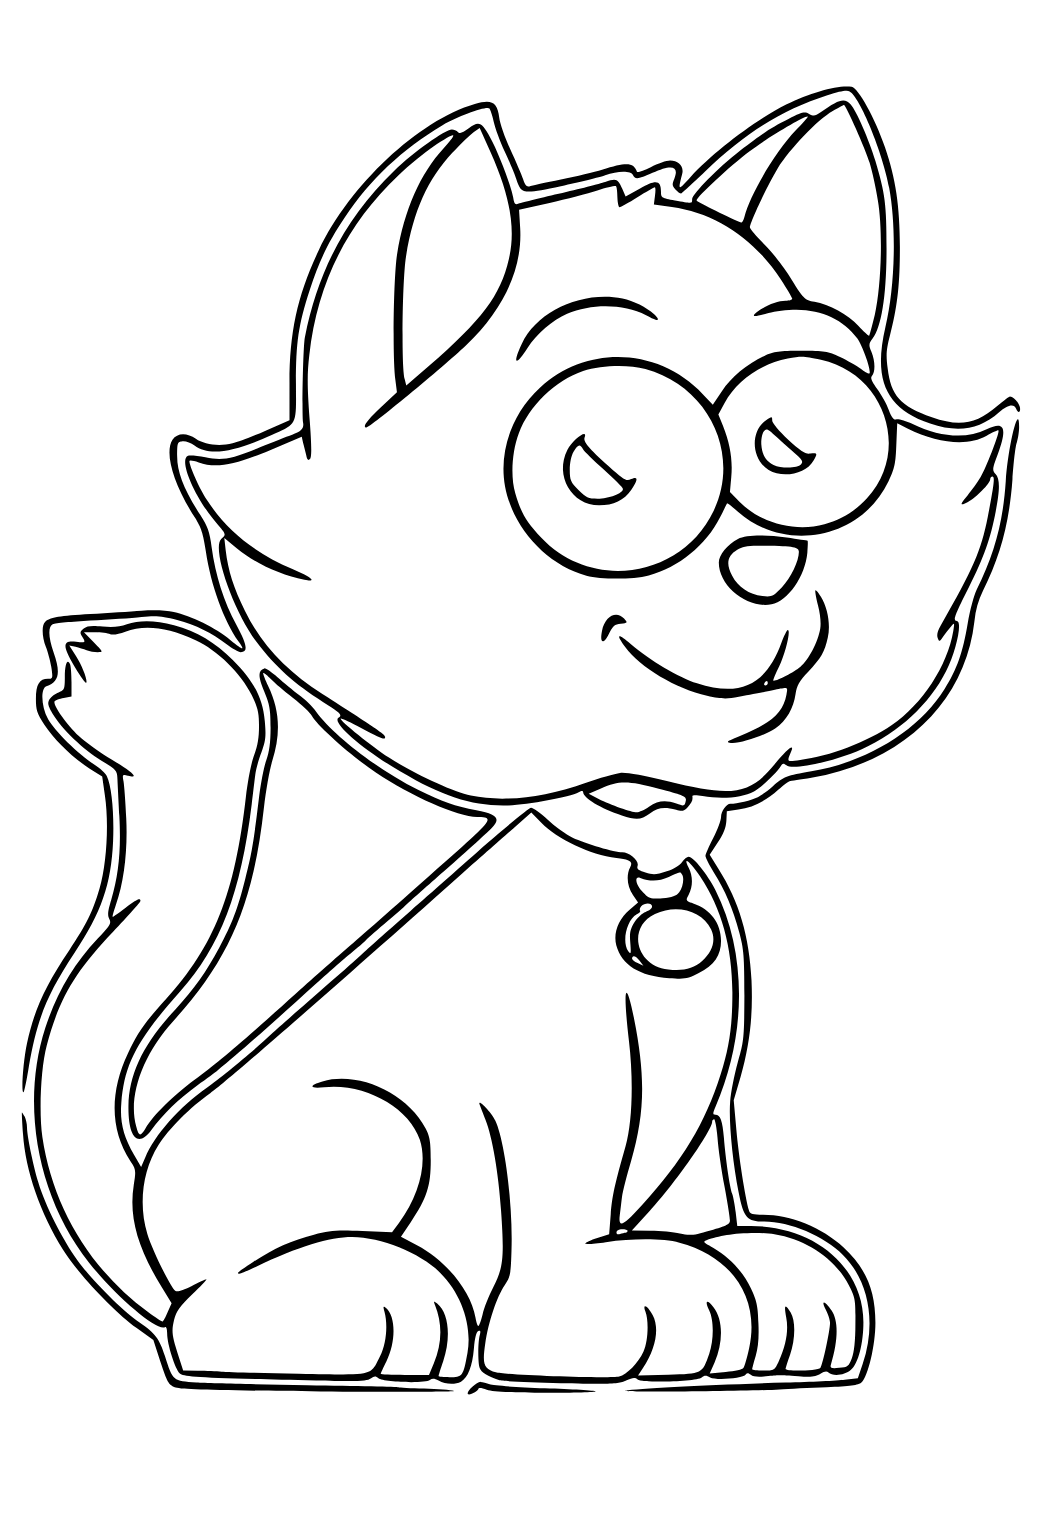 Free Printable Cartoon Cat Smile Coloring Page for Adults and Kids